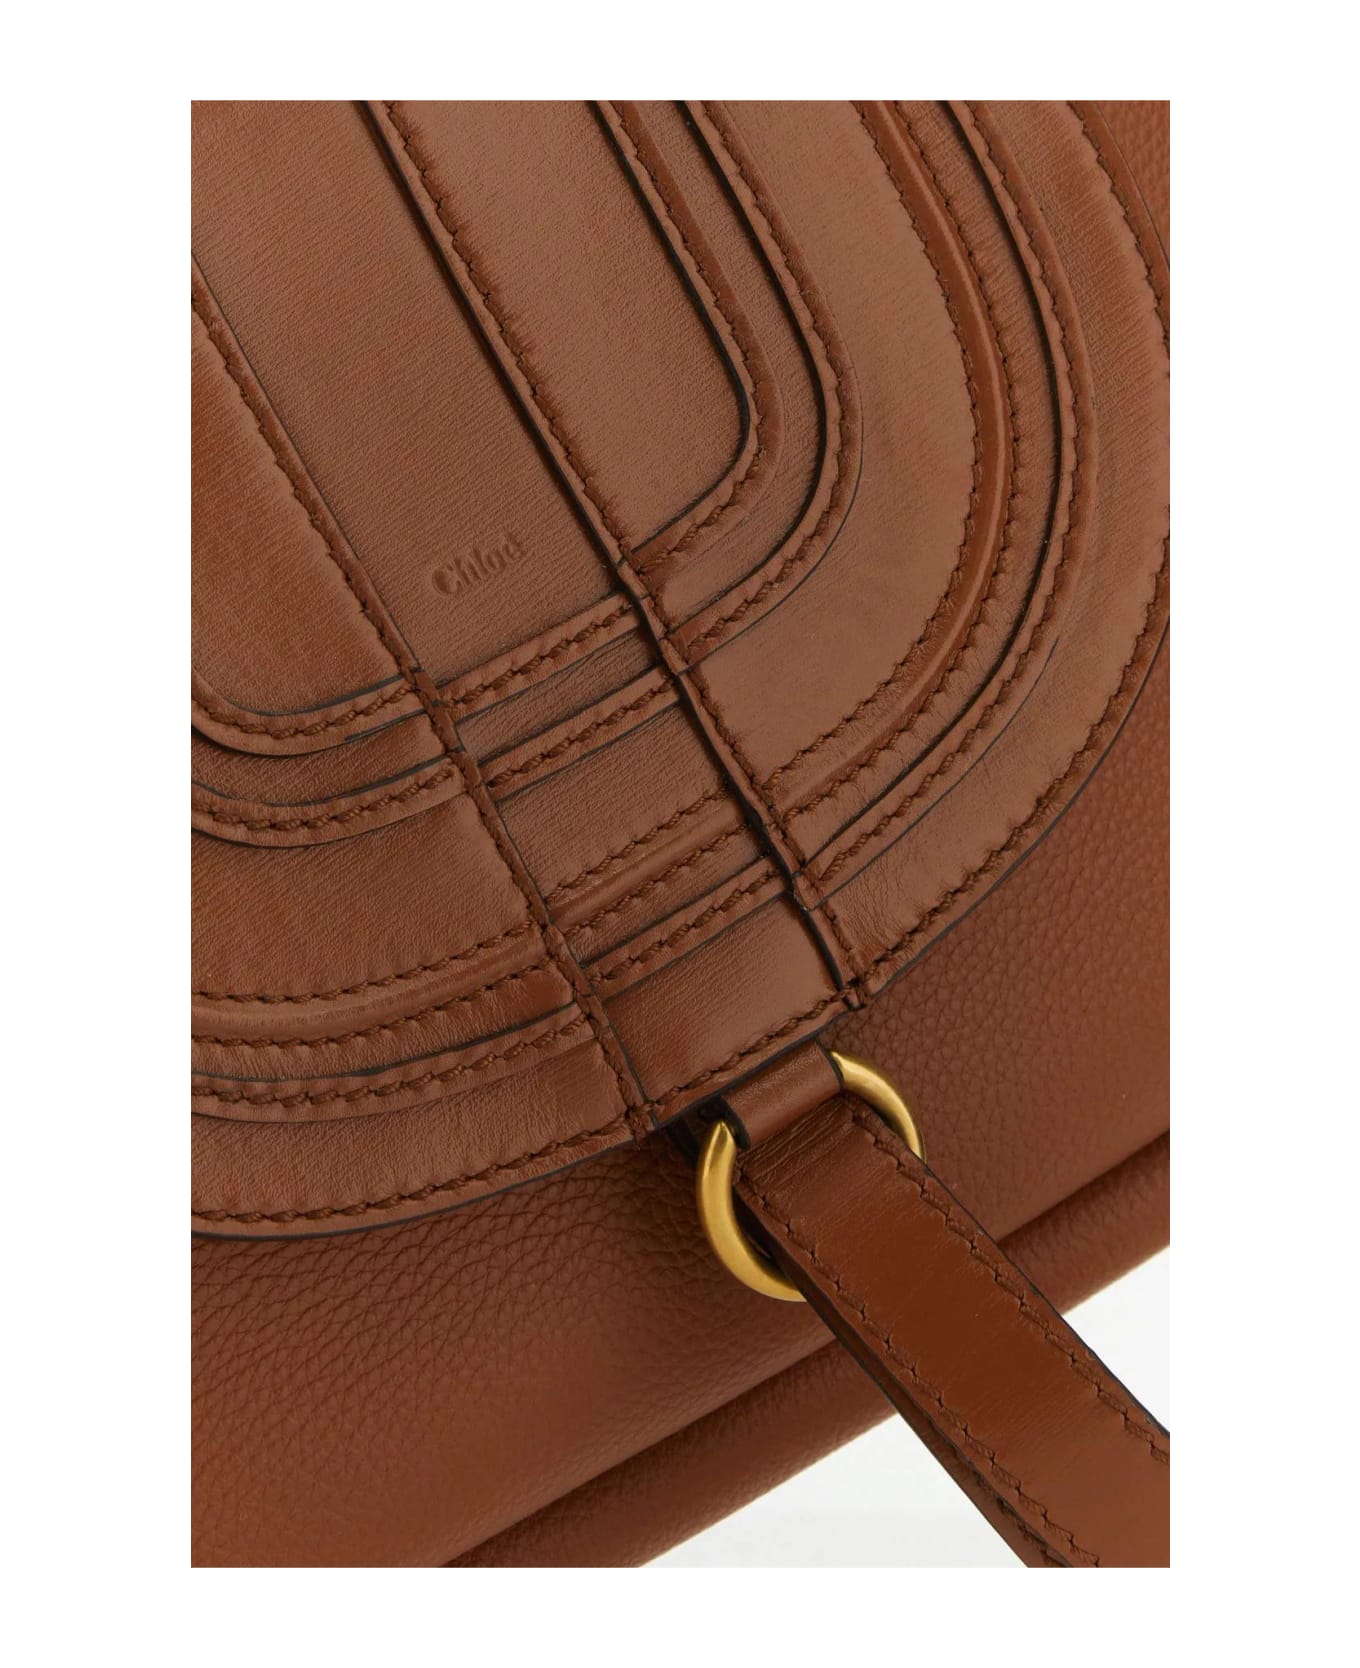 Chloé Brown Leather Marcie Clutch - Leather Brown